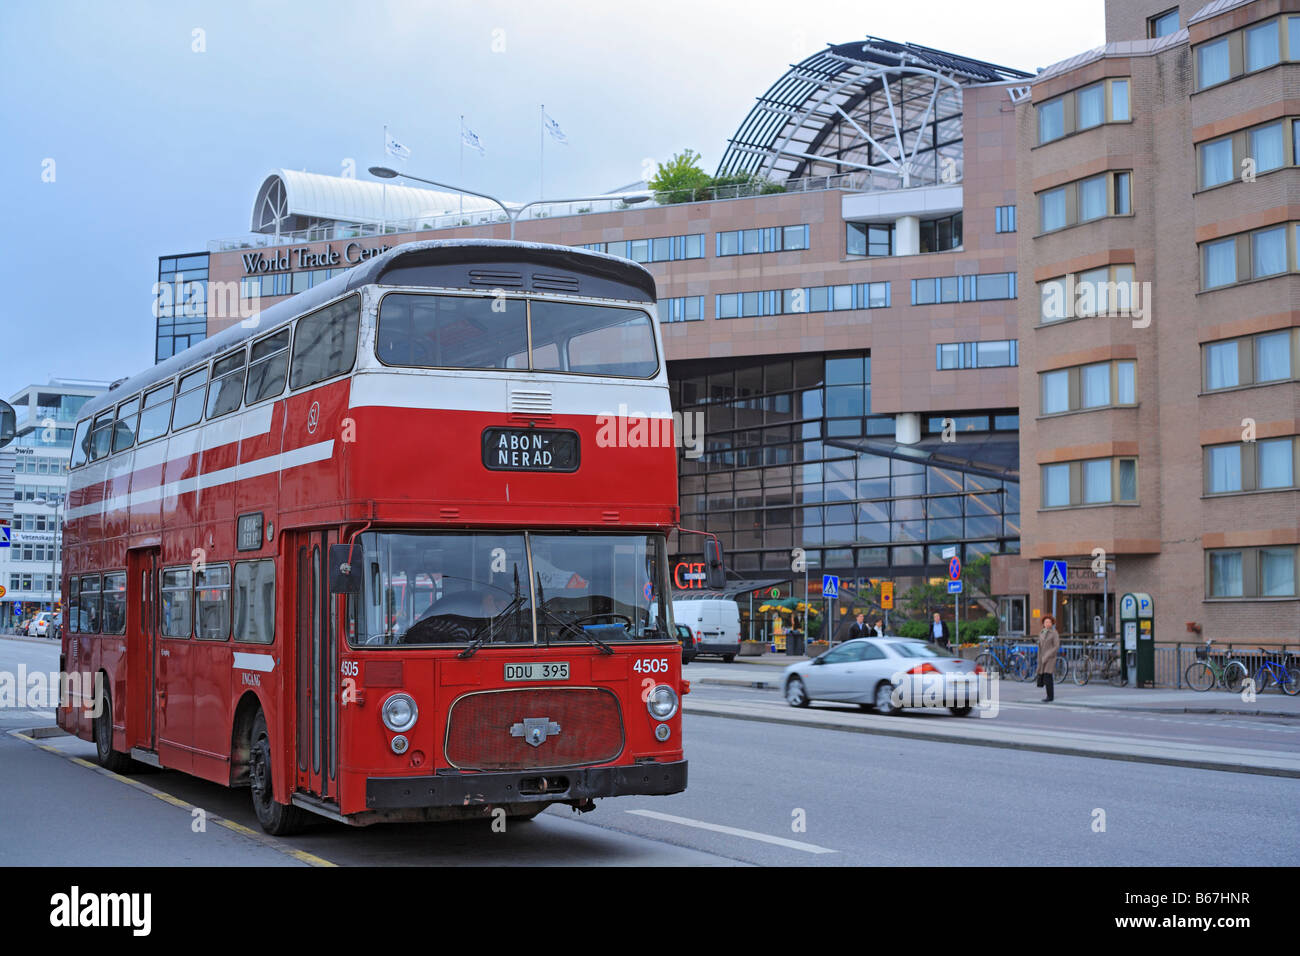 Red tourist on the street of city, Stockholm, Stock Photo Alamy